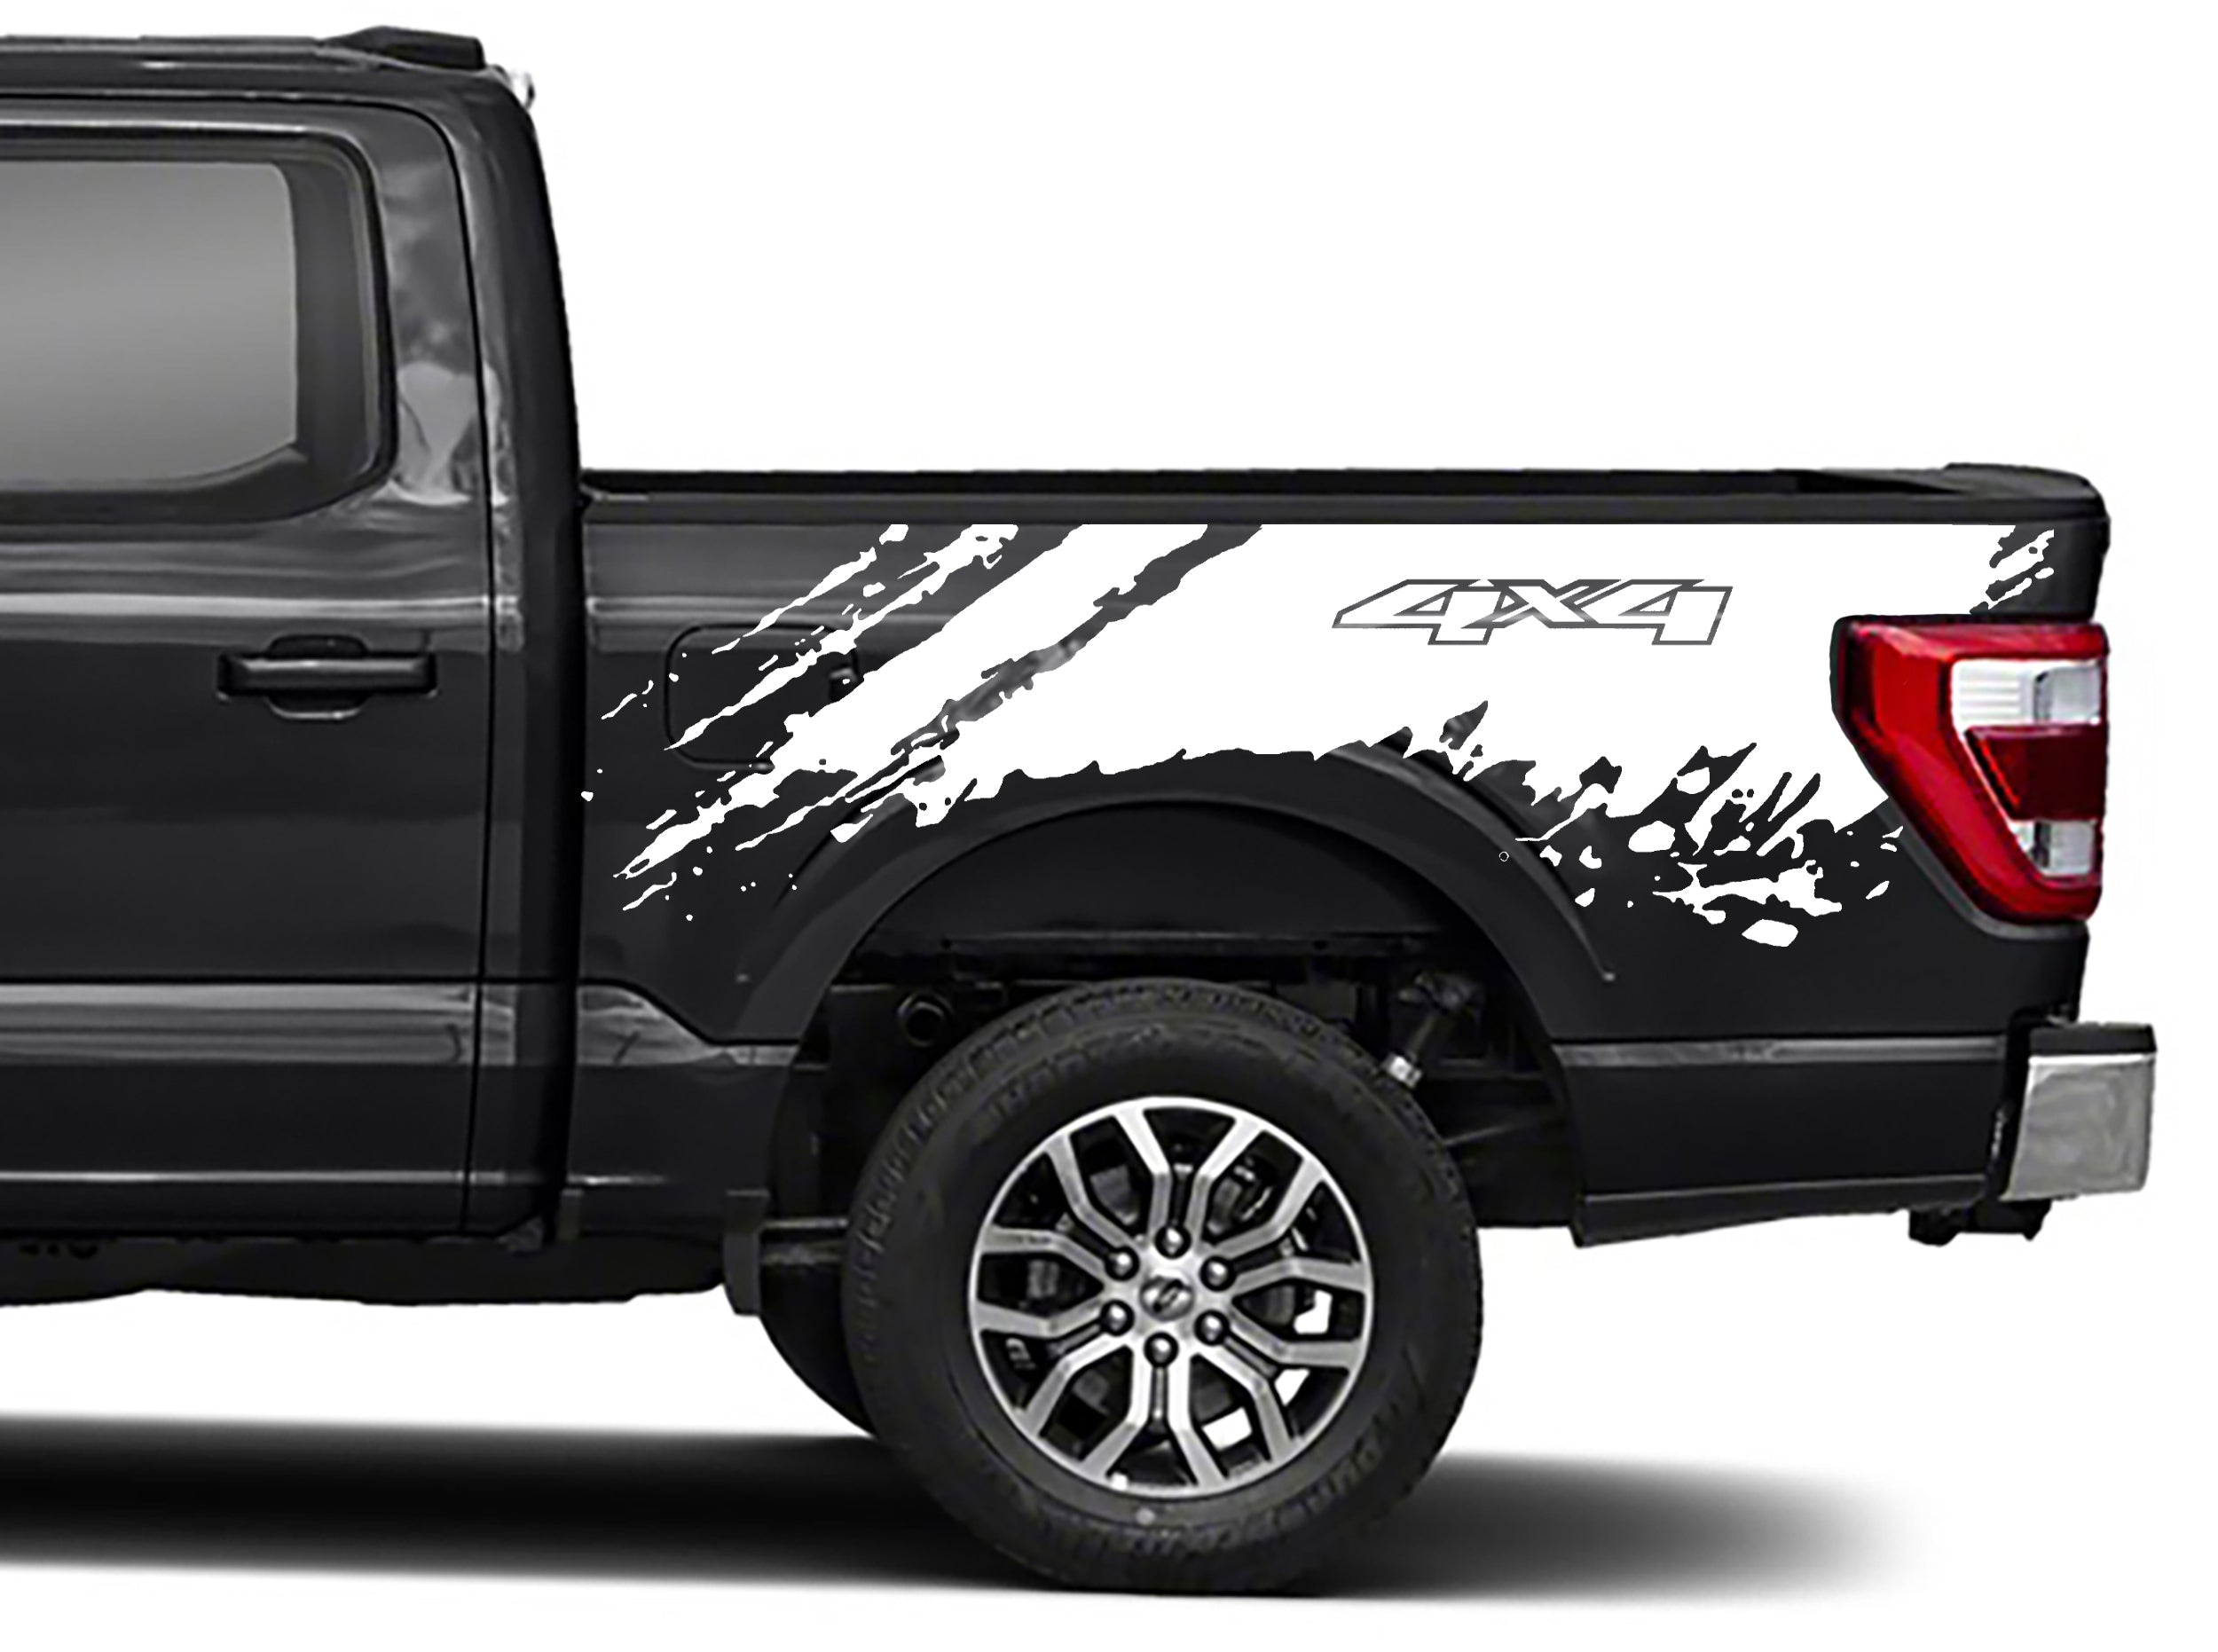 Mud Splash 4x4 Bed Graphics for ford f 150 2021 to 2023 models white